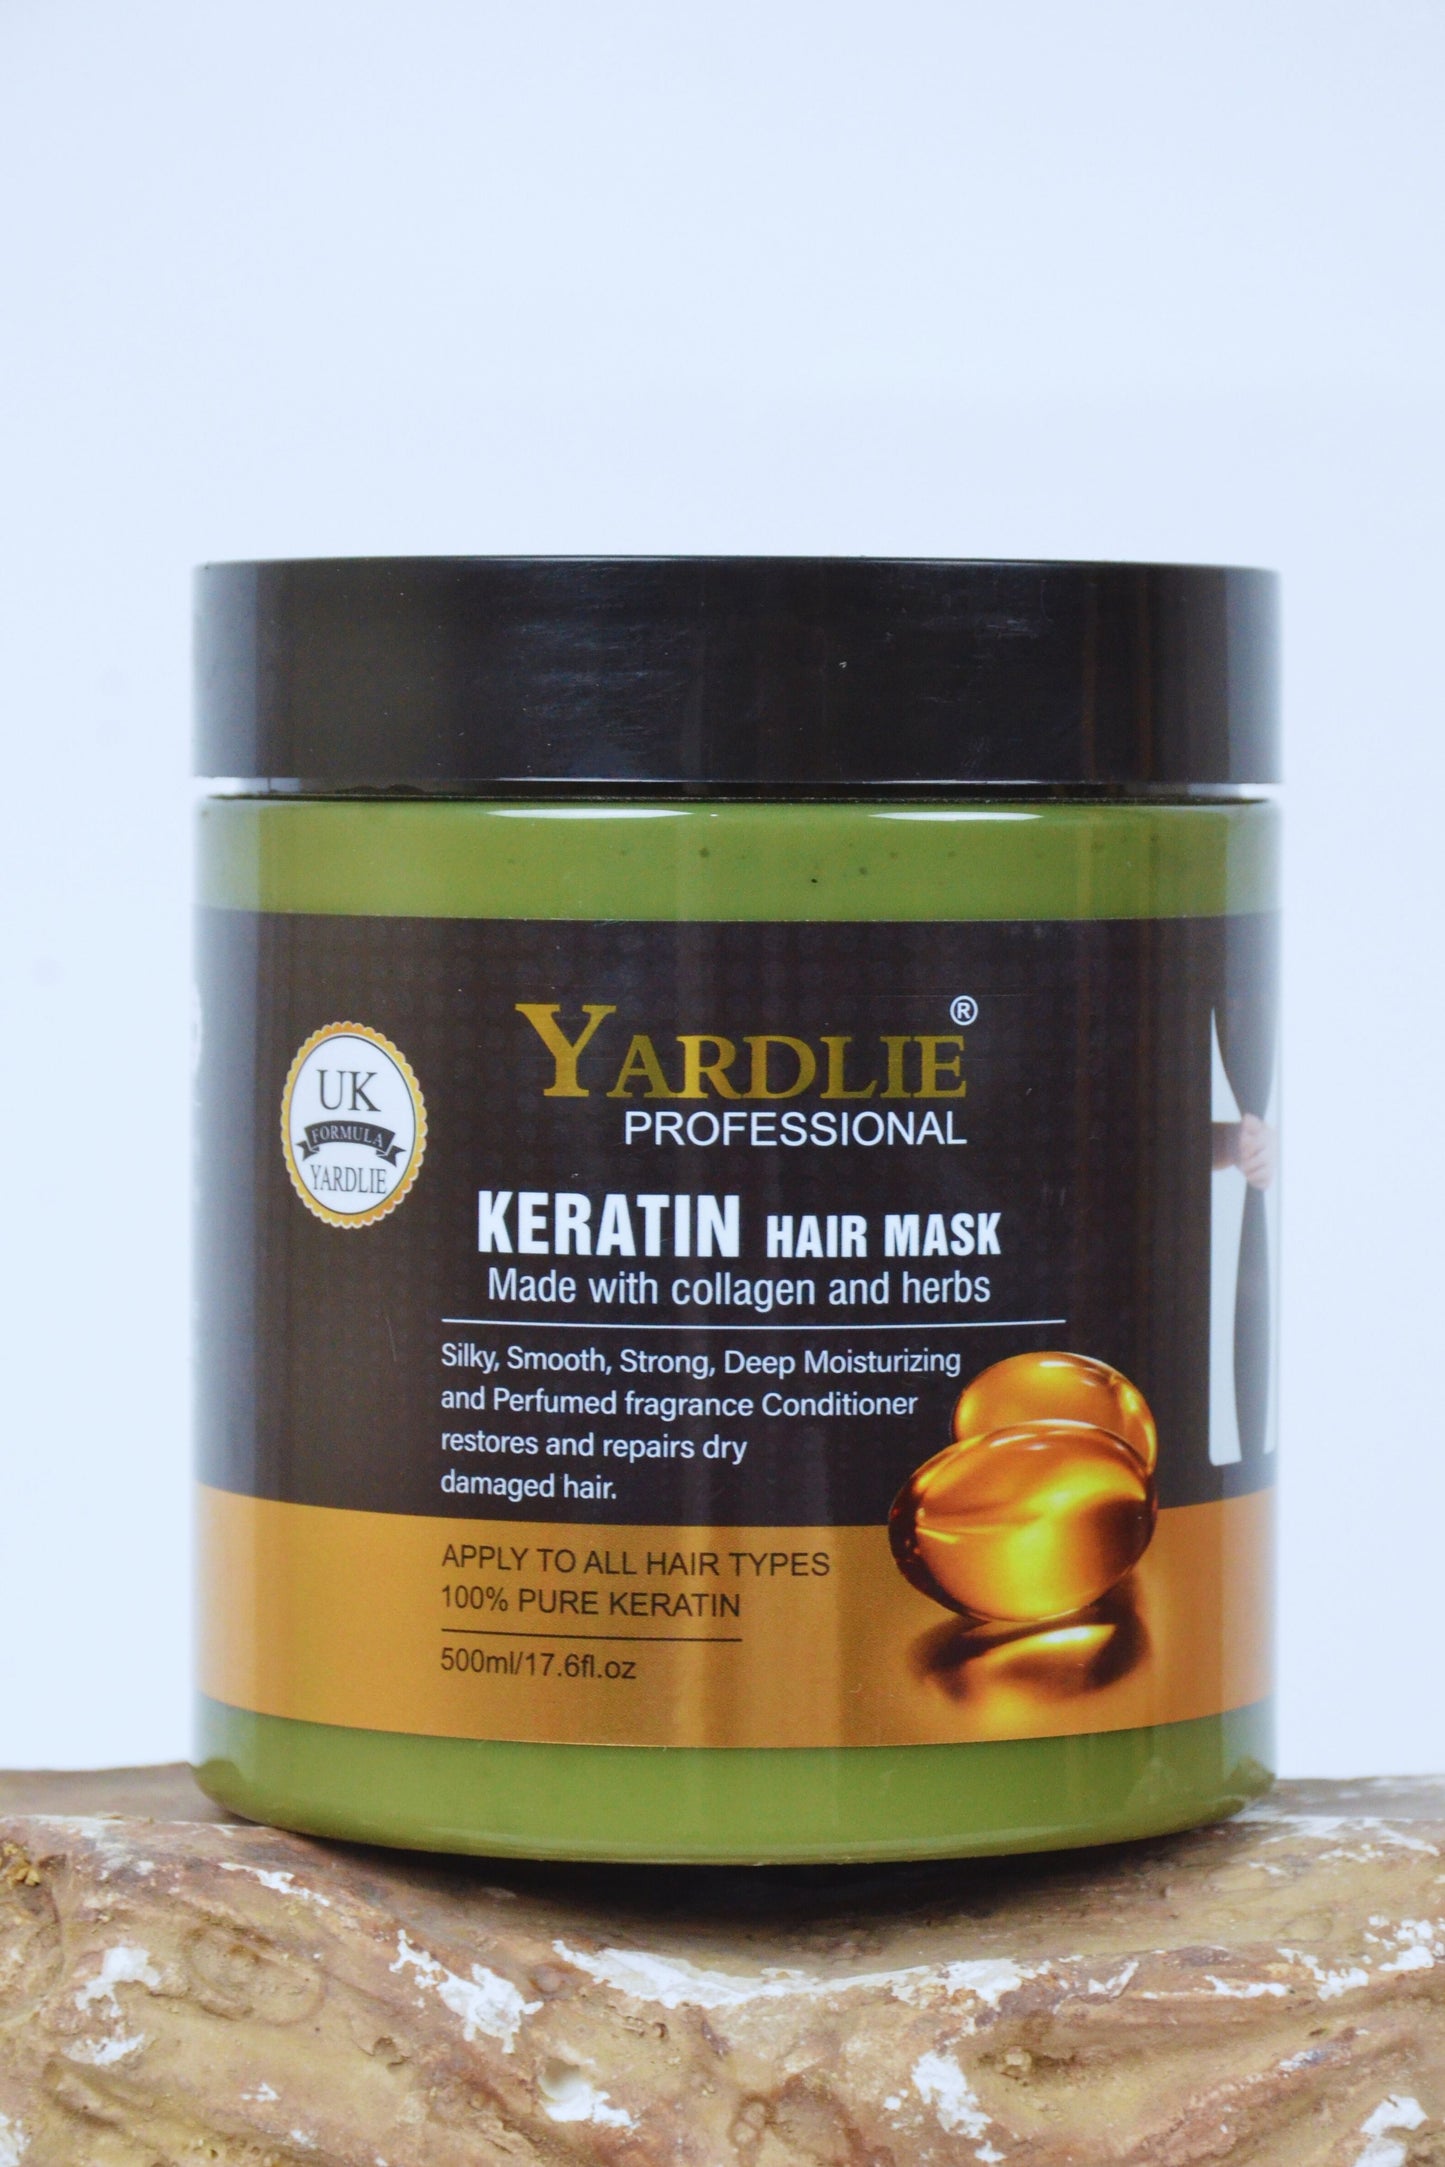 Yardlie Collagen and Herbs 2 in 1 Hair Mask & Repair Conditioner 500g.